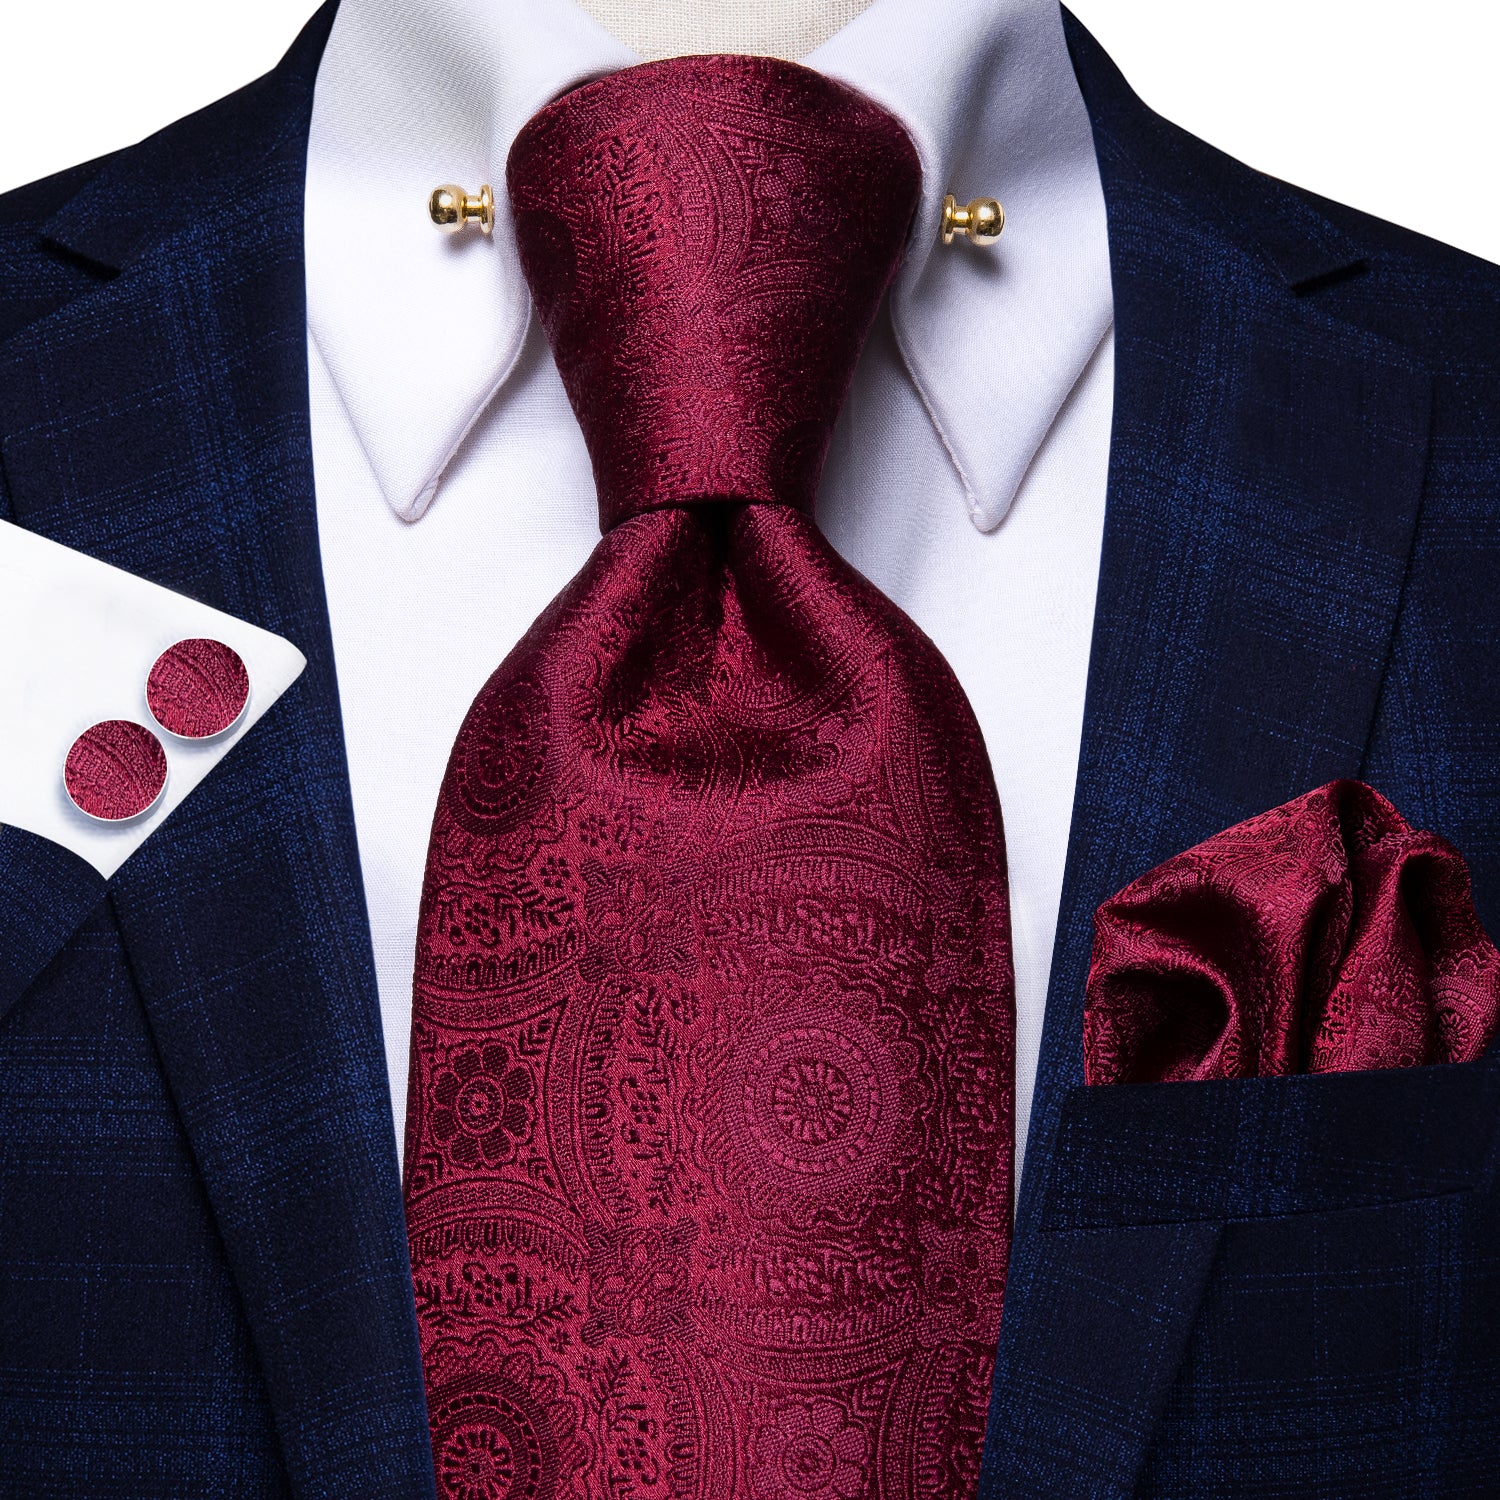 Solid Wine Red Floral Necktie Pocket Square Cufflinks Set with Collar Pin